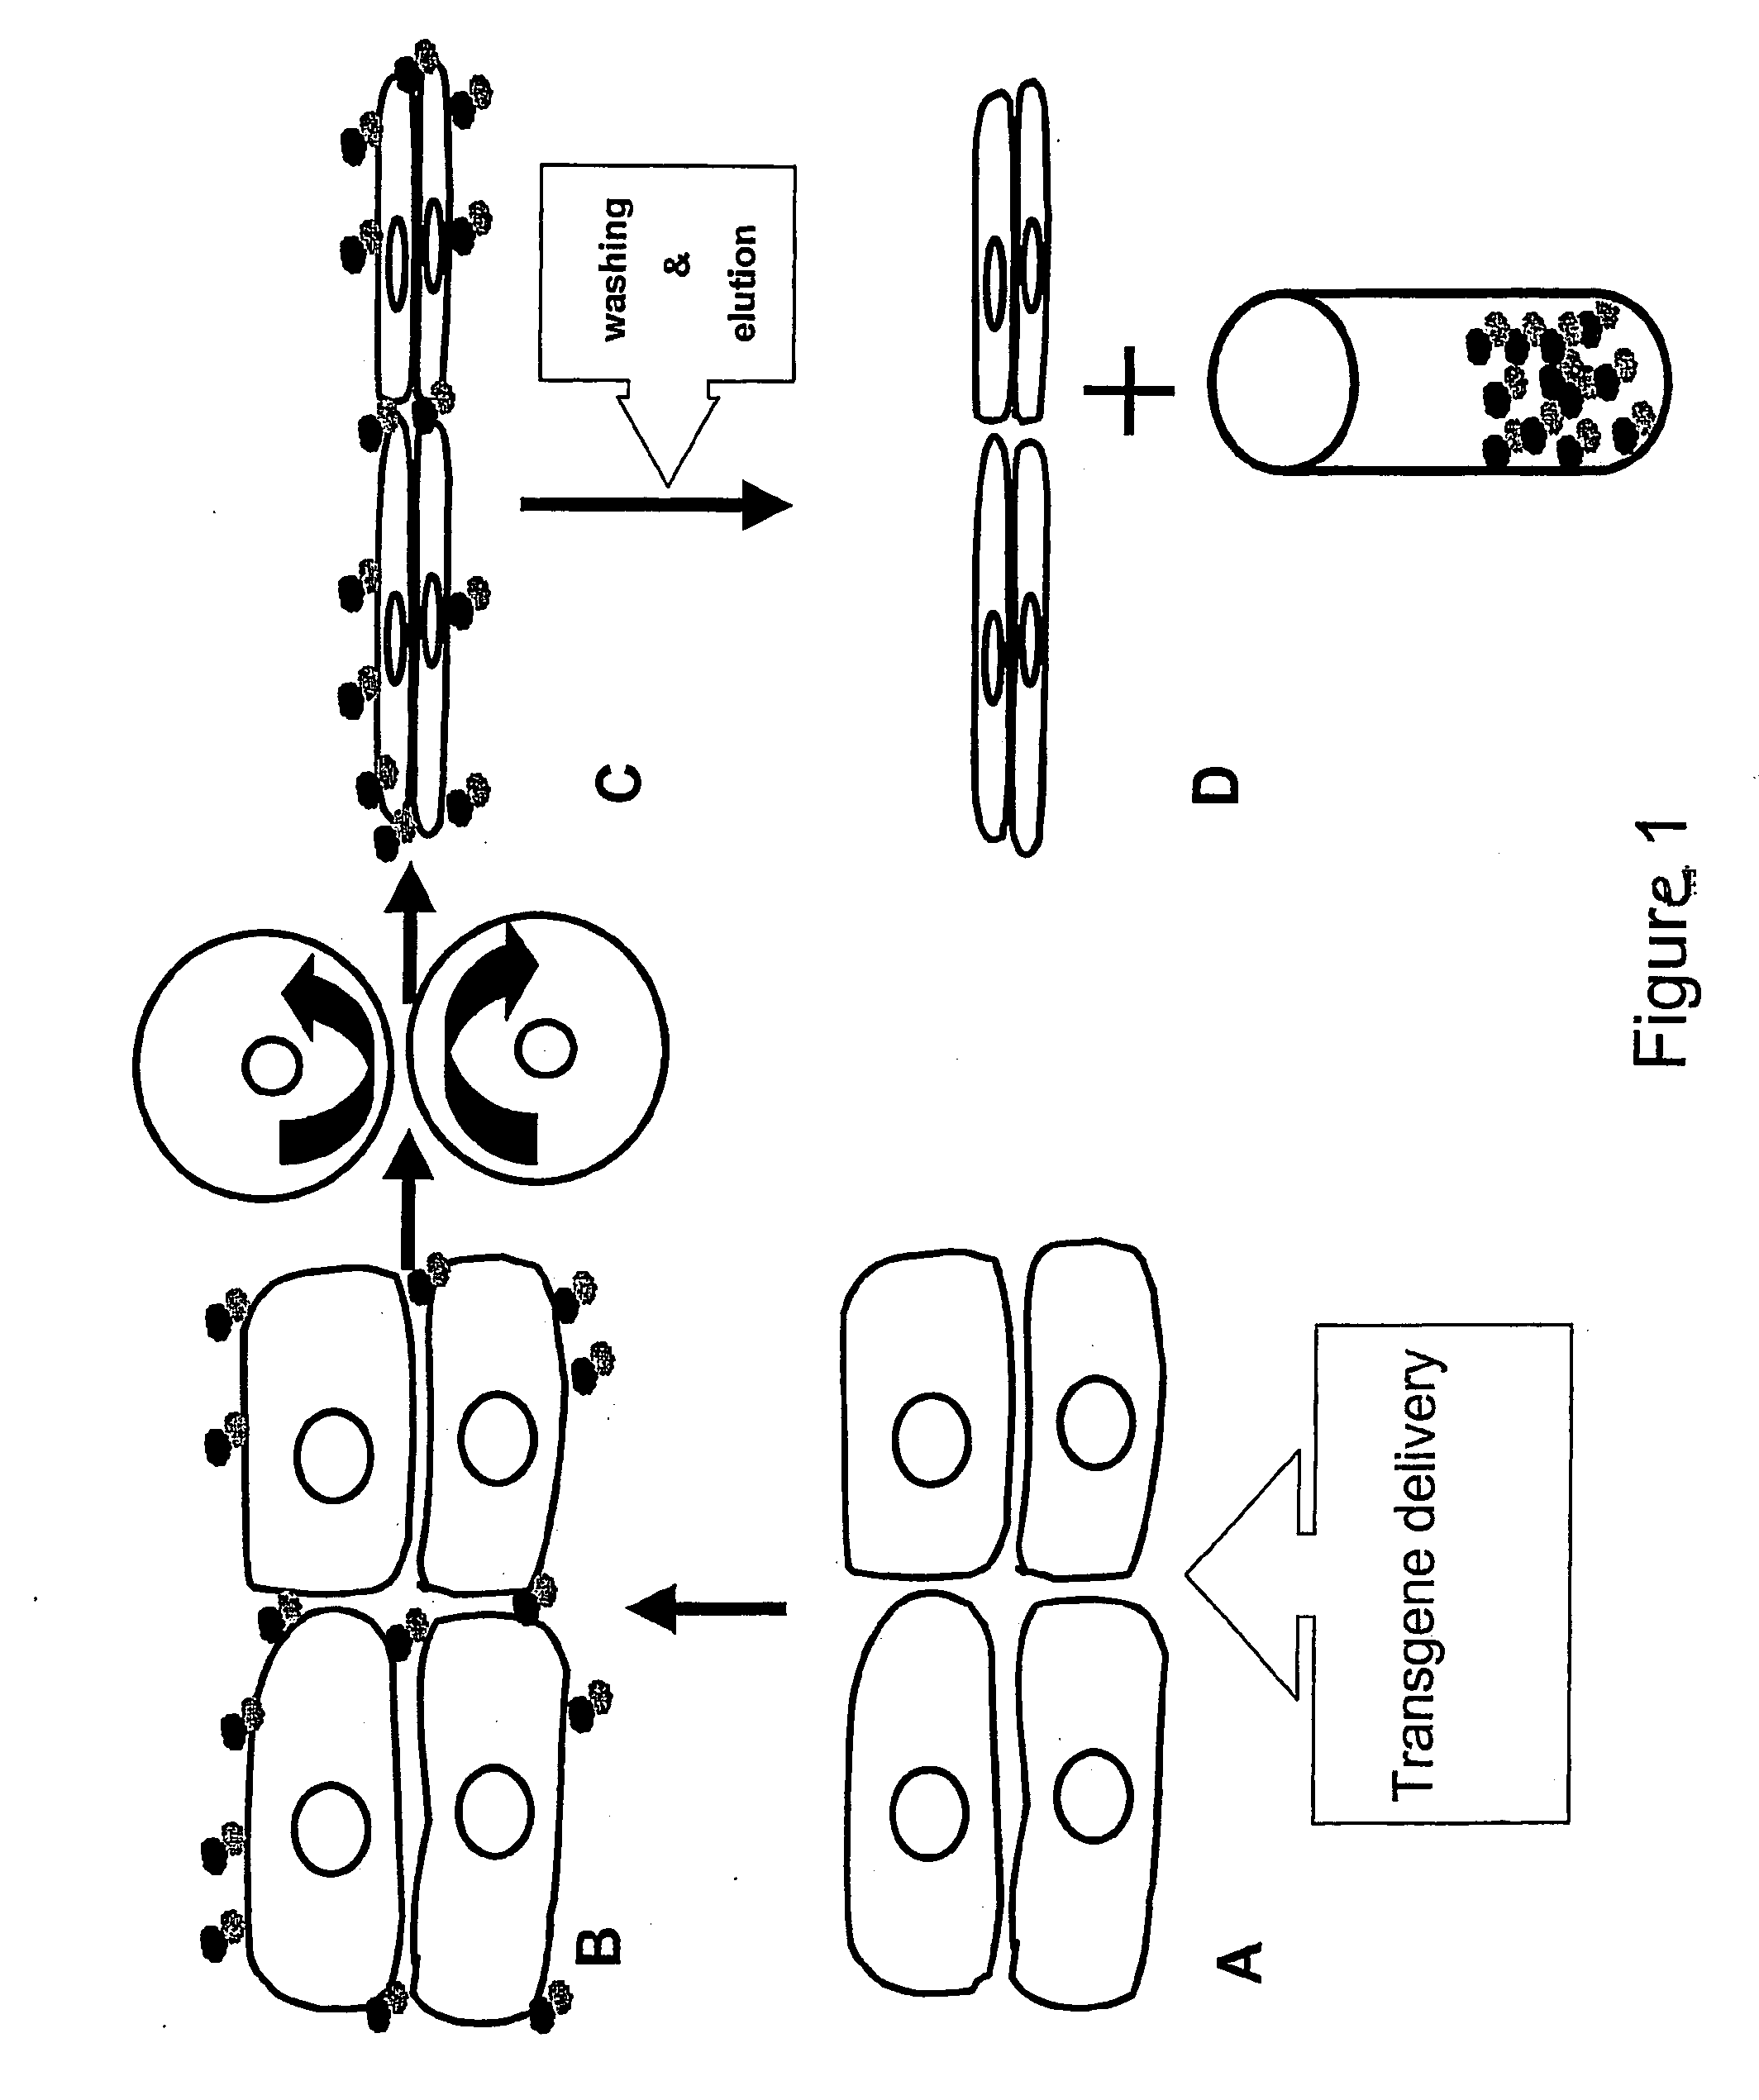 Method of protein production in plants